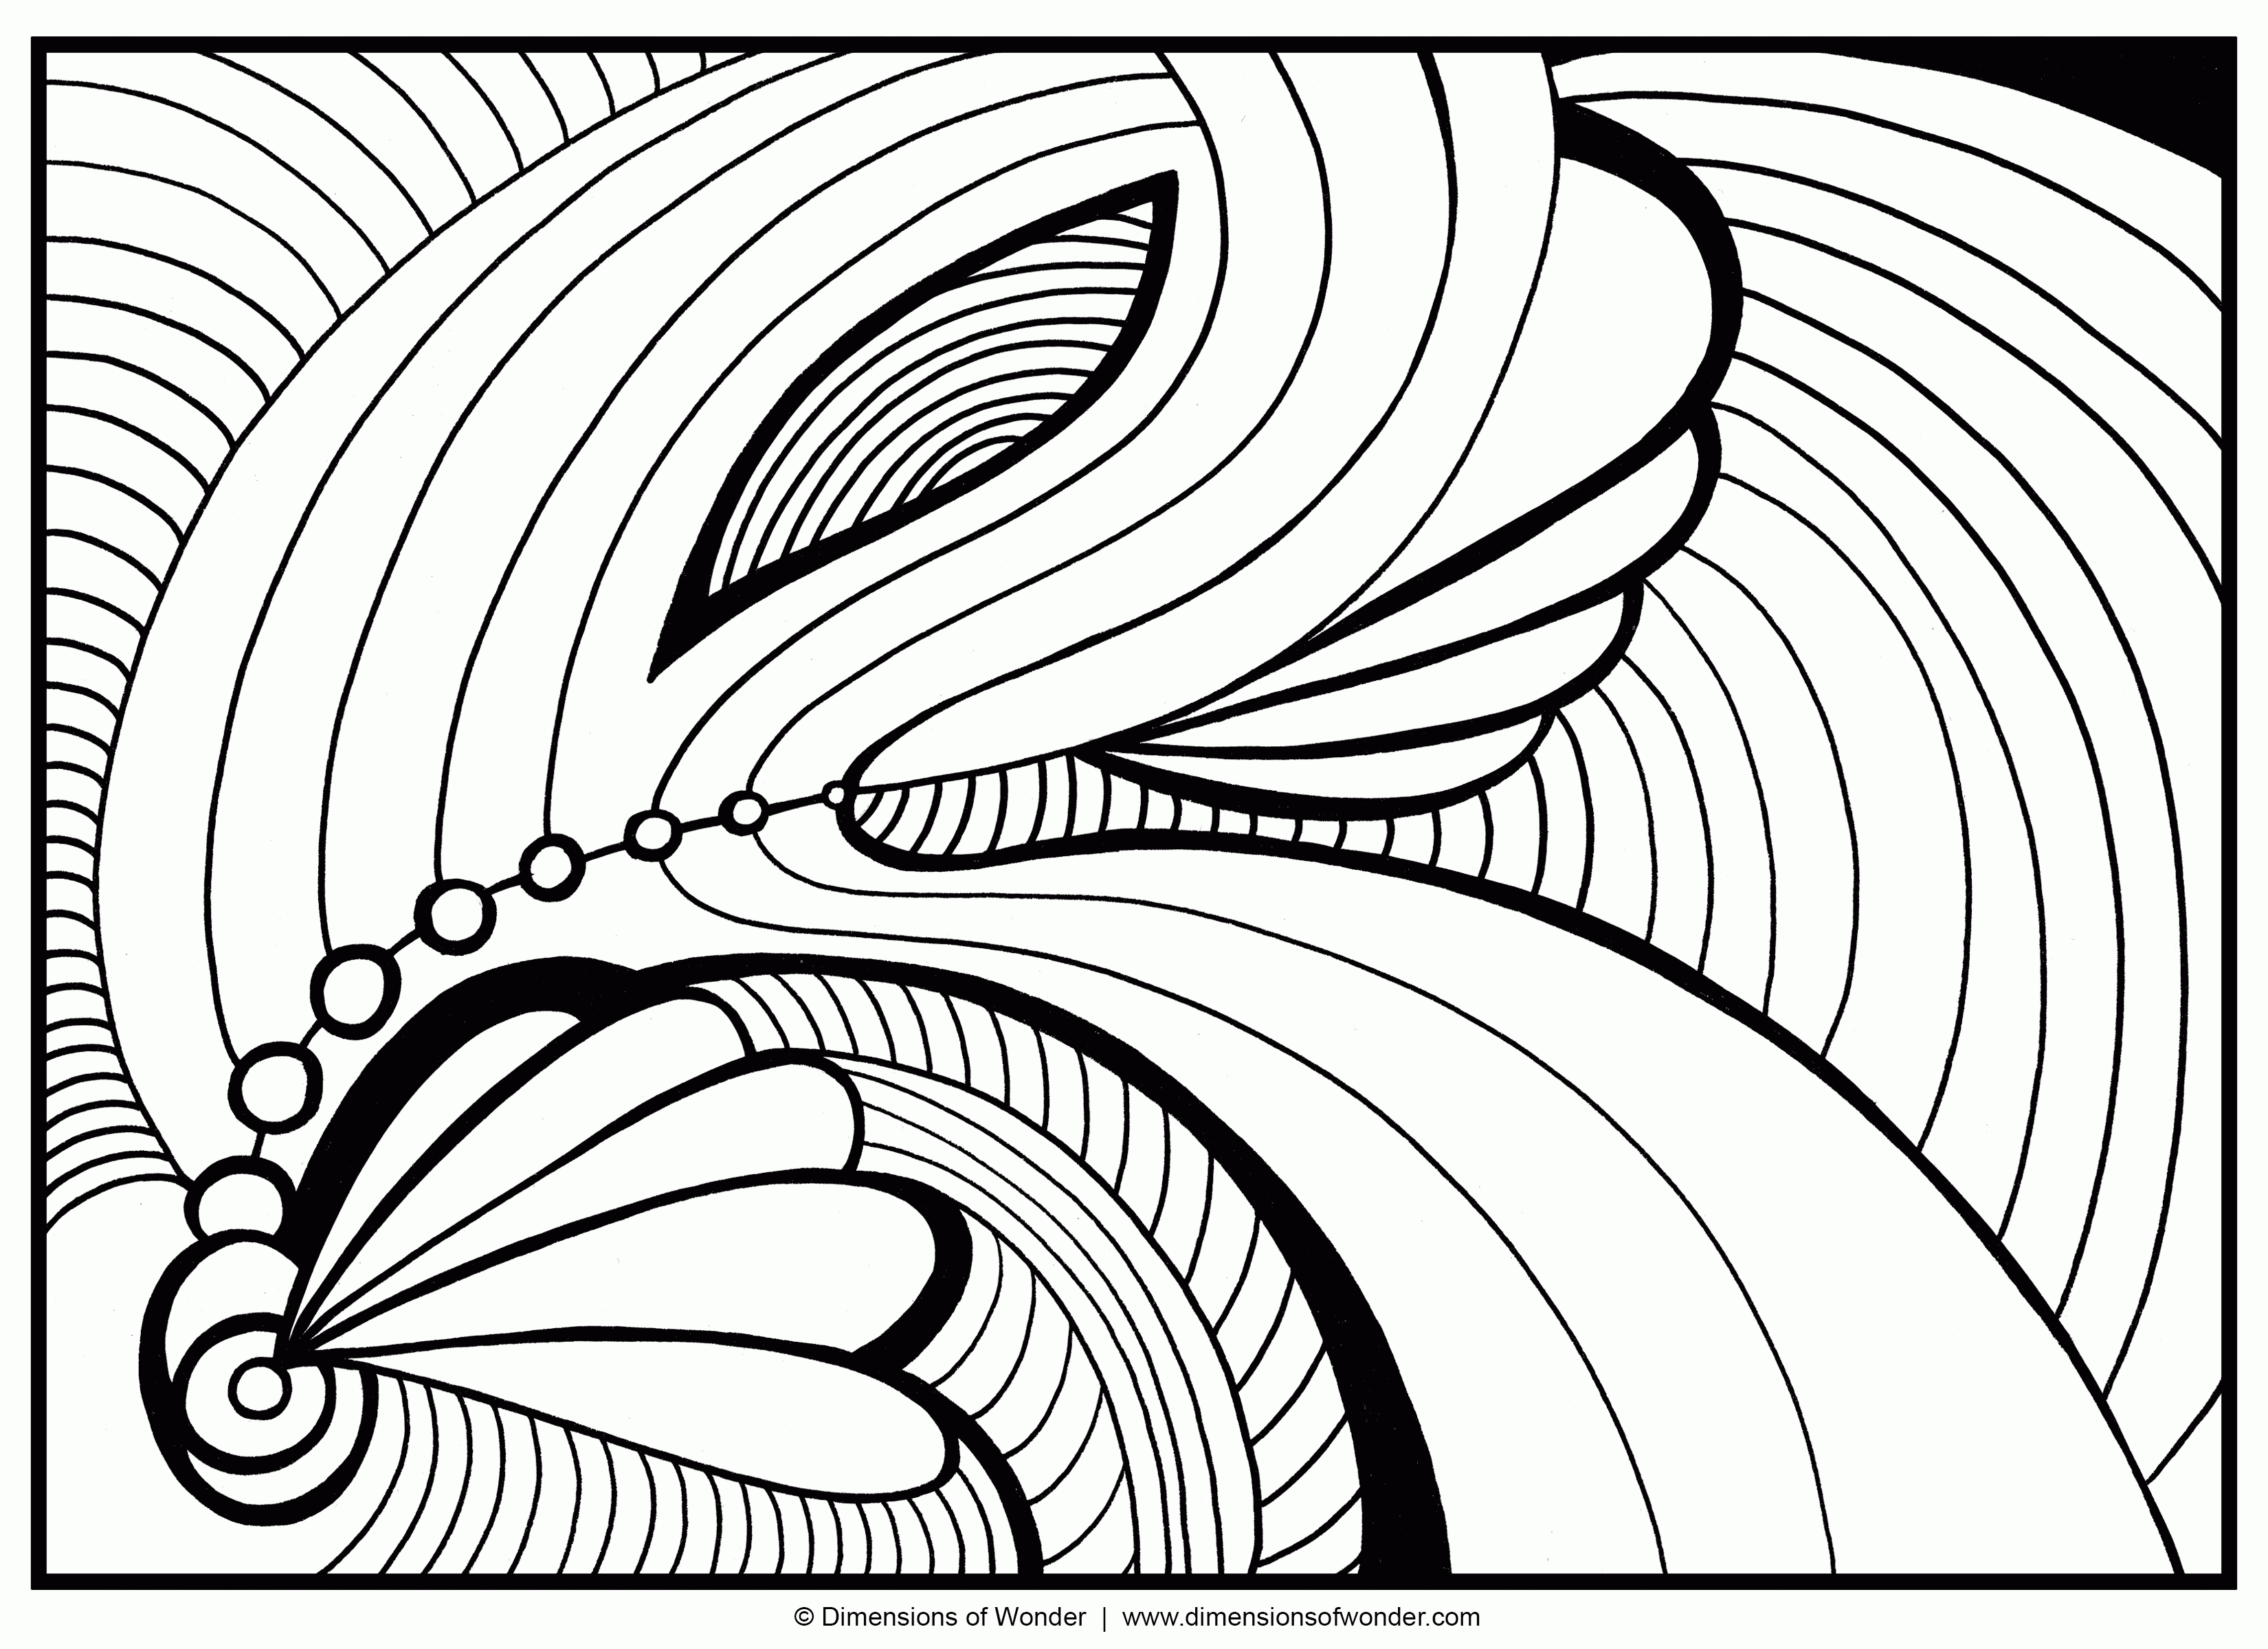 Download Coloring Pages Hard Designs - Coloring Home